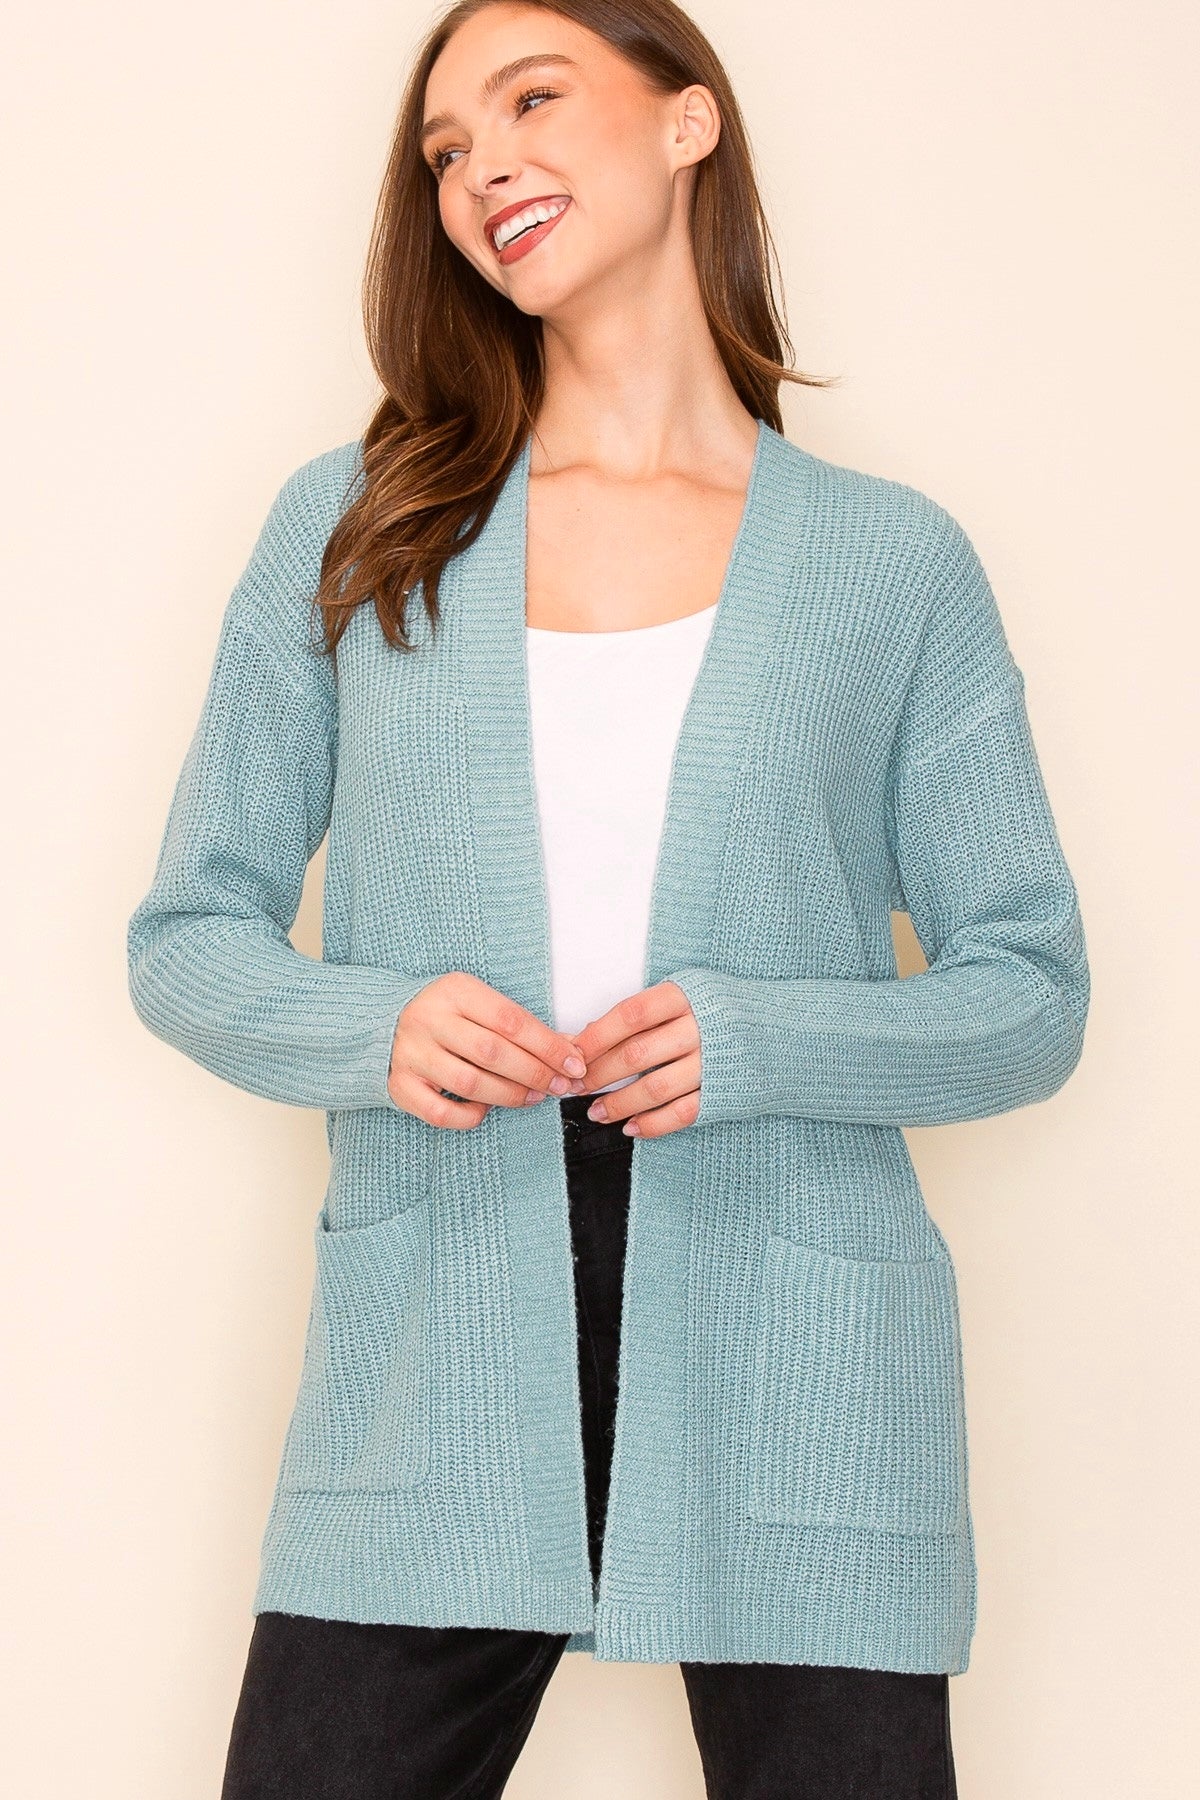 TEAL BLUE OPEN FRONT POCKET SWEATER CARDIGAN